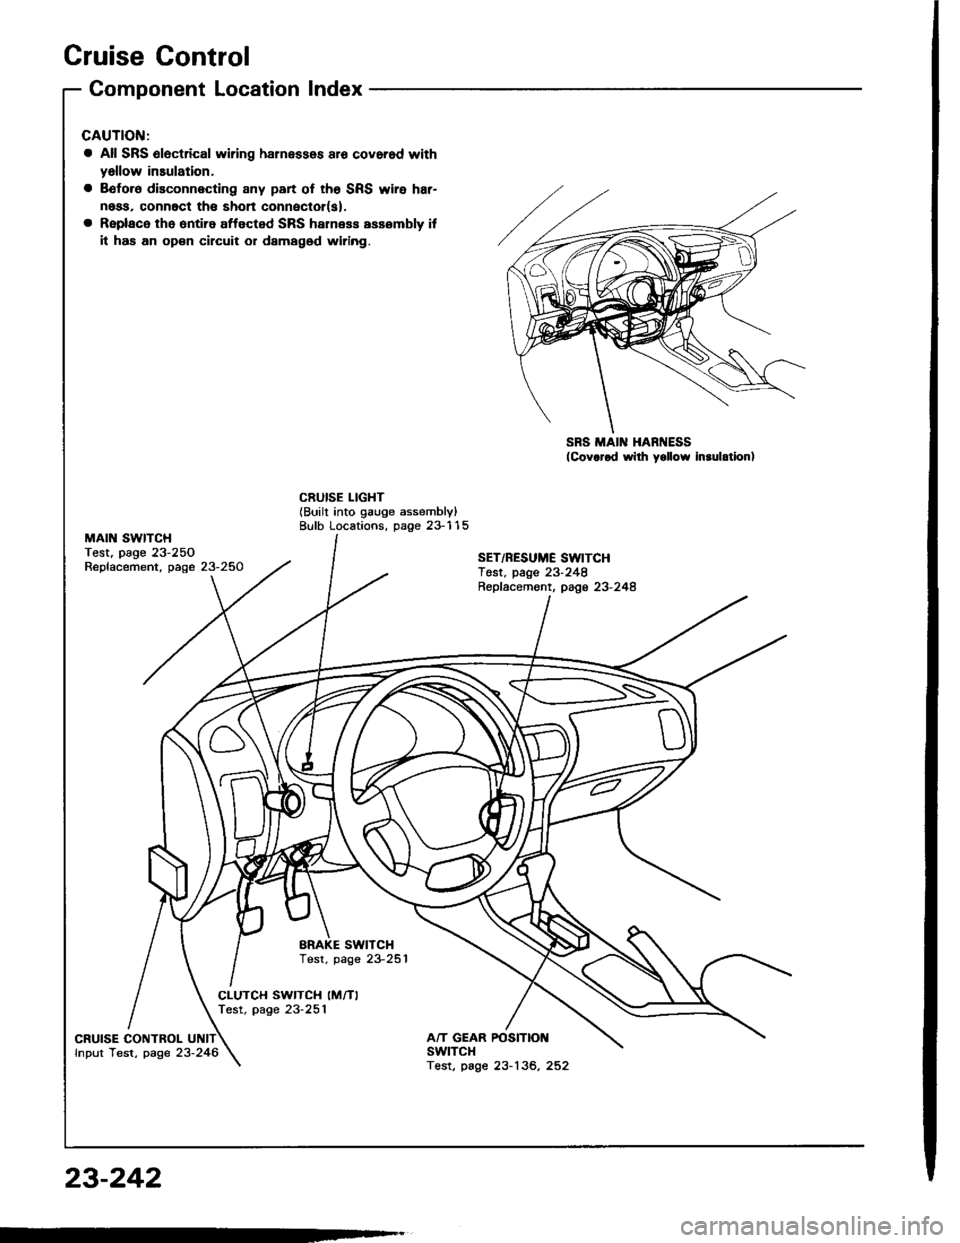 ACURA INTEGRA 1994  Service Service Manual Cruise Control
MAIN SWITCHTest, page 23-250Replacement, page 23-250
Component Location Index
a All SRS 6l6ctrical wiring harnessos aro covorod with
yallow insulation,
a Bofo.6 disconnecting any part o